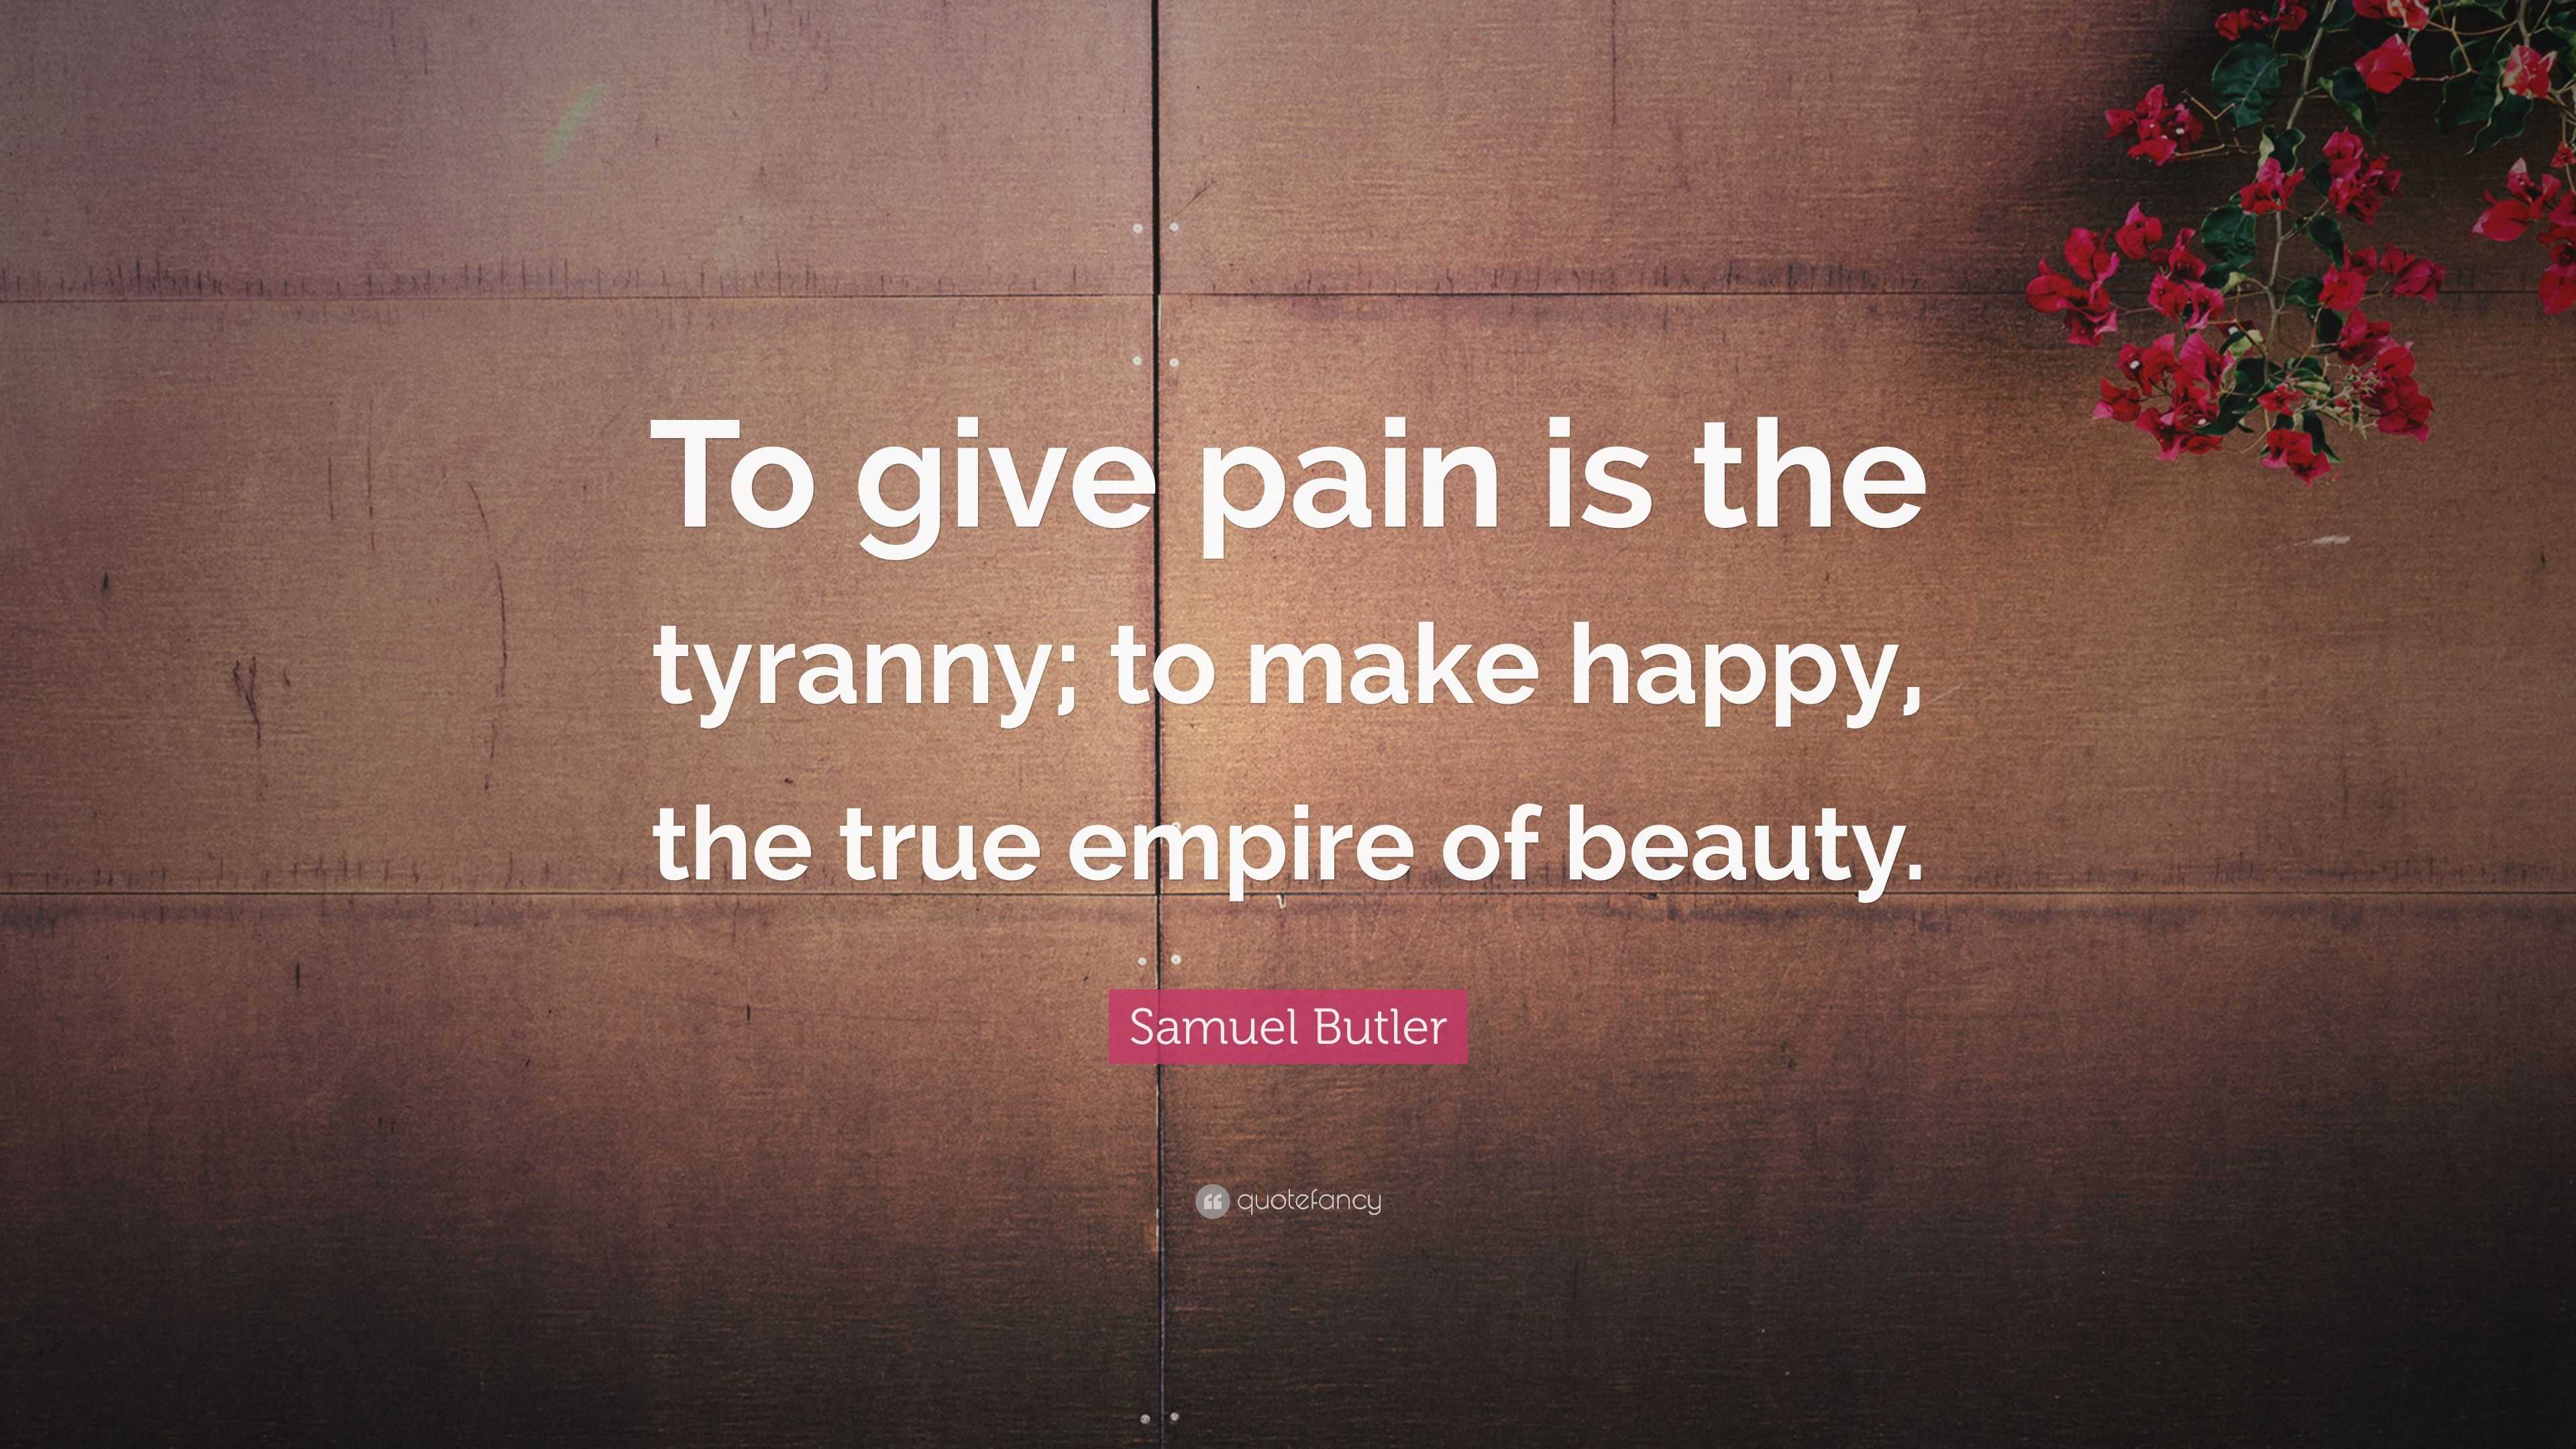 Samuel Butler Quote “To give pain is the tyranny; to make